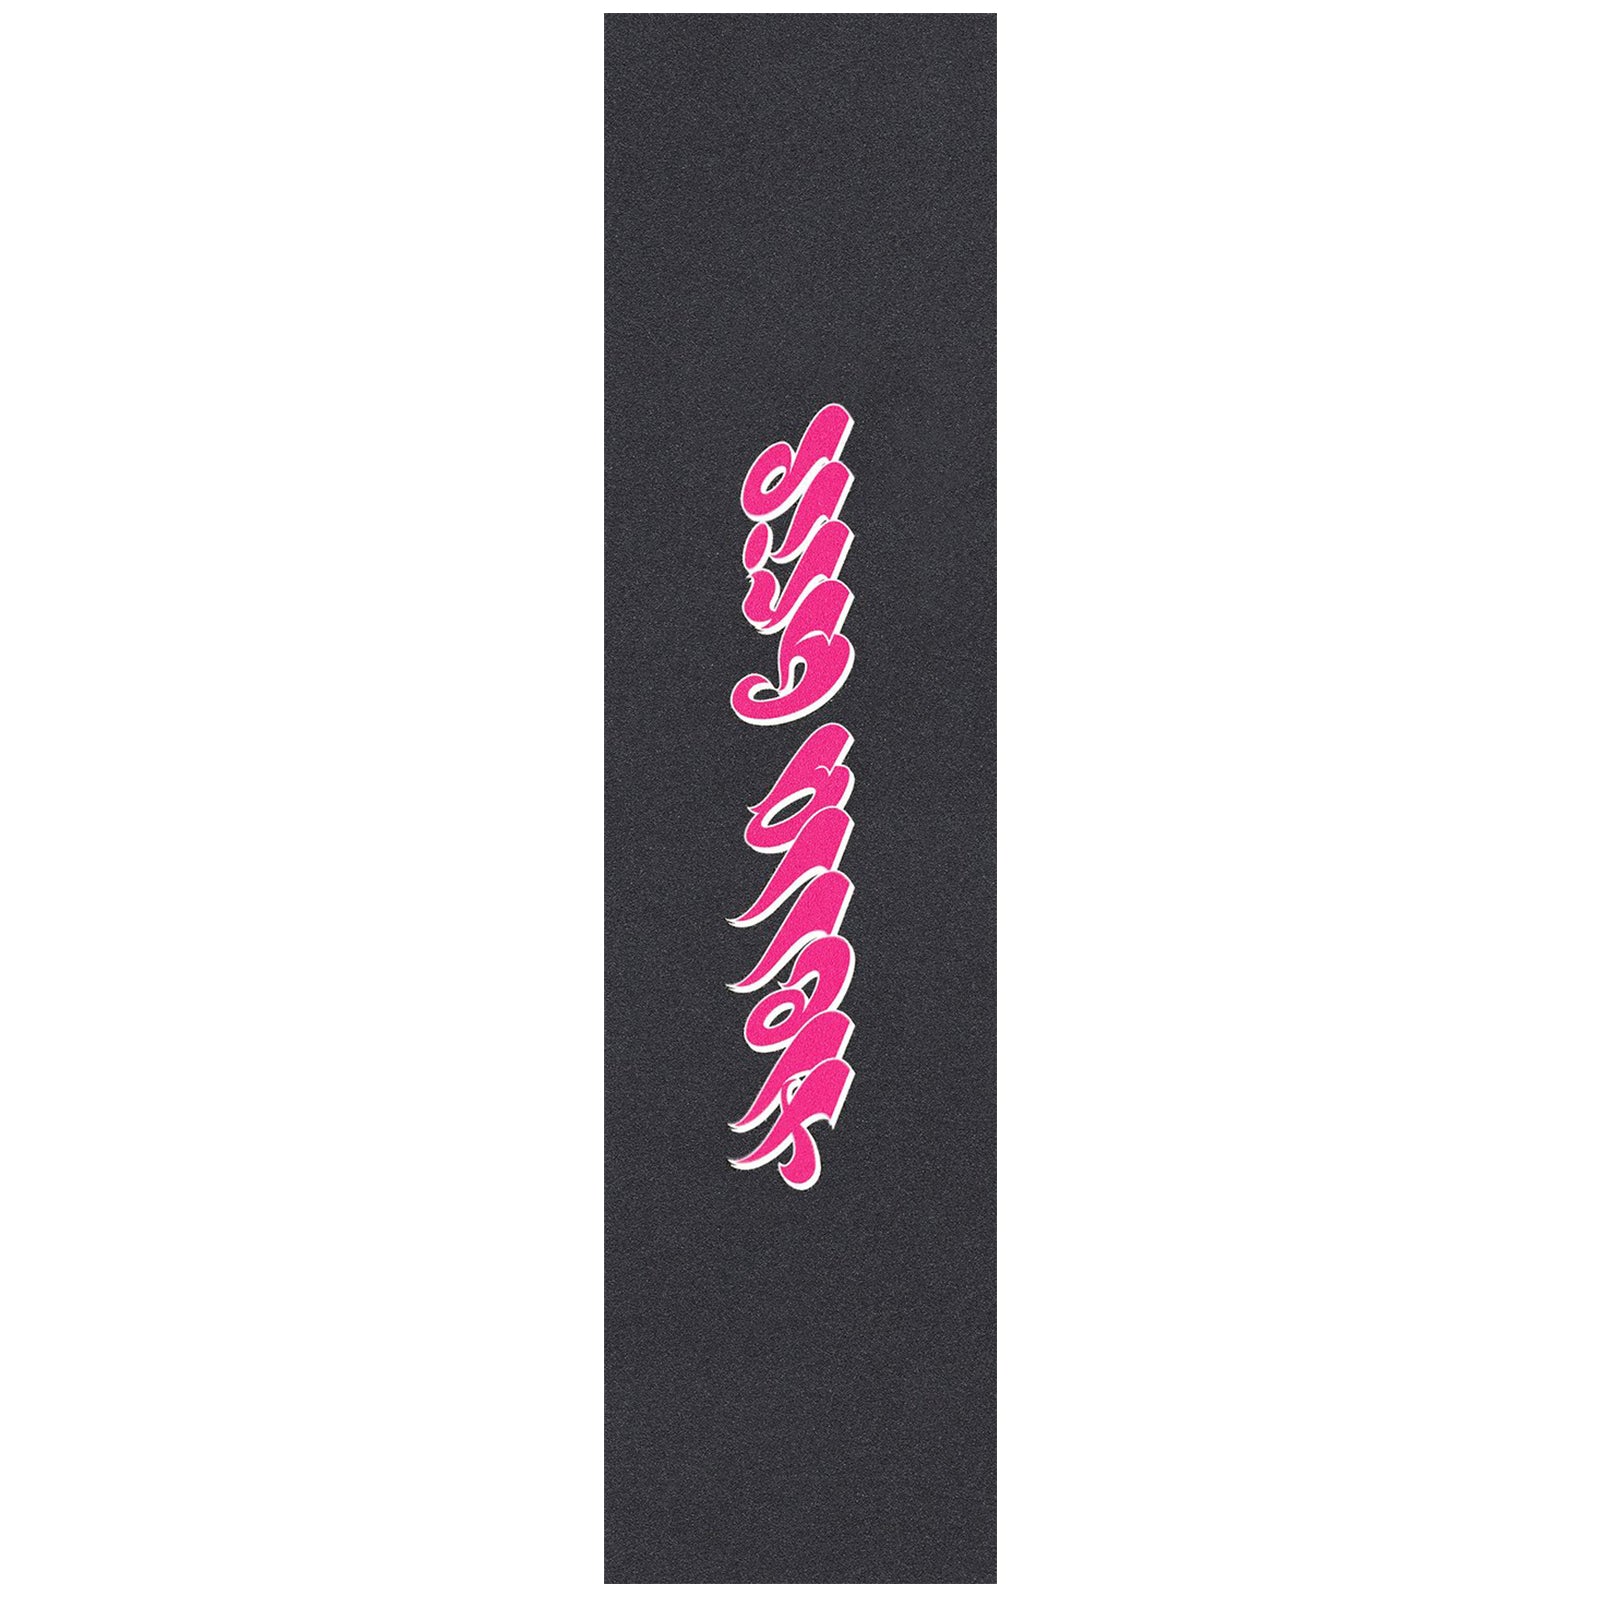 Hella grip Pink Panther - Kevin Closson Sig GRIPTAPE